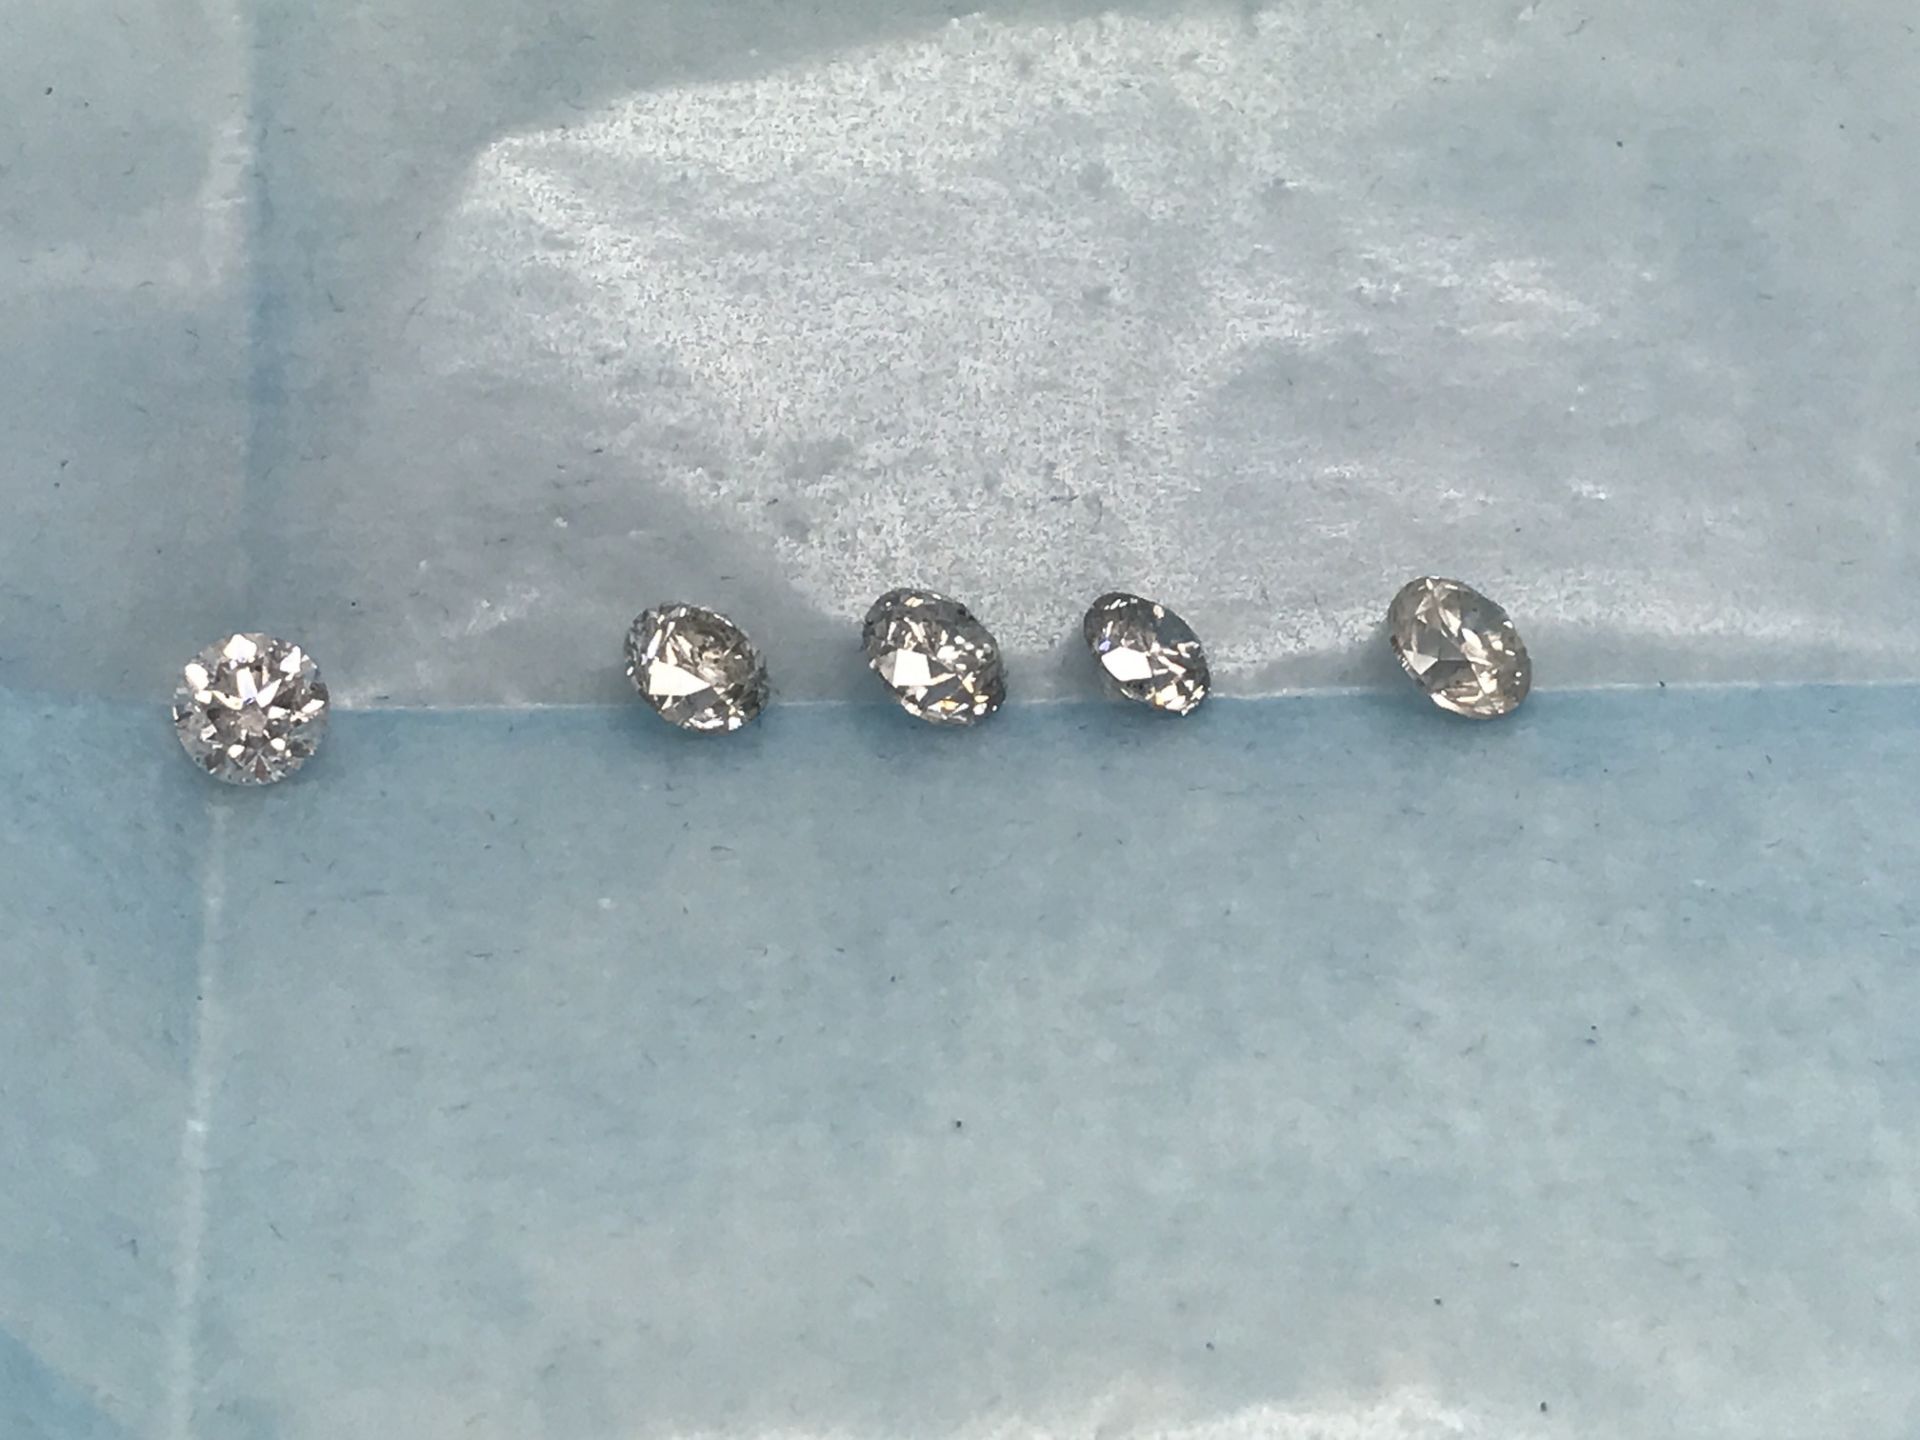 5.59cts OF LOOSE DIAMONDS INCLUDING - Image 2 of 2